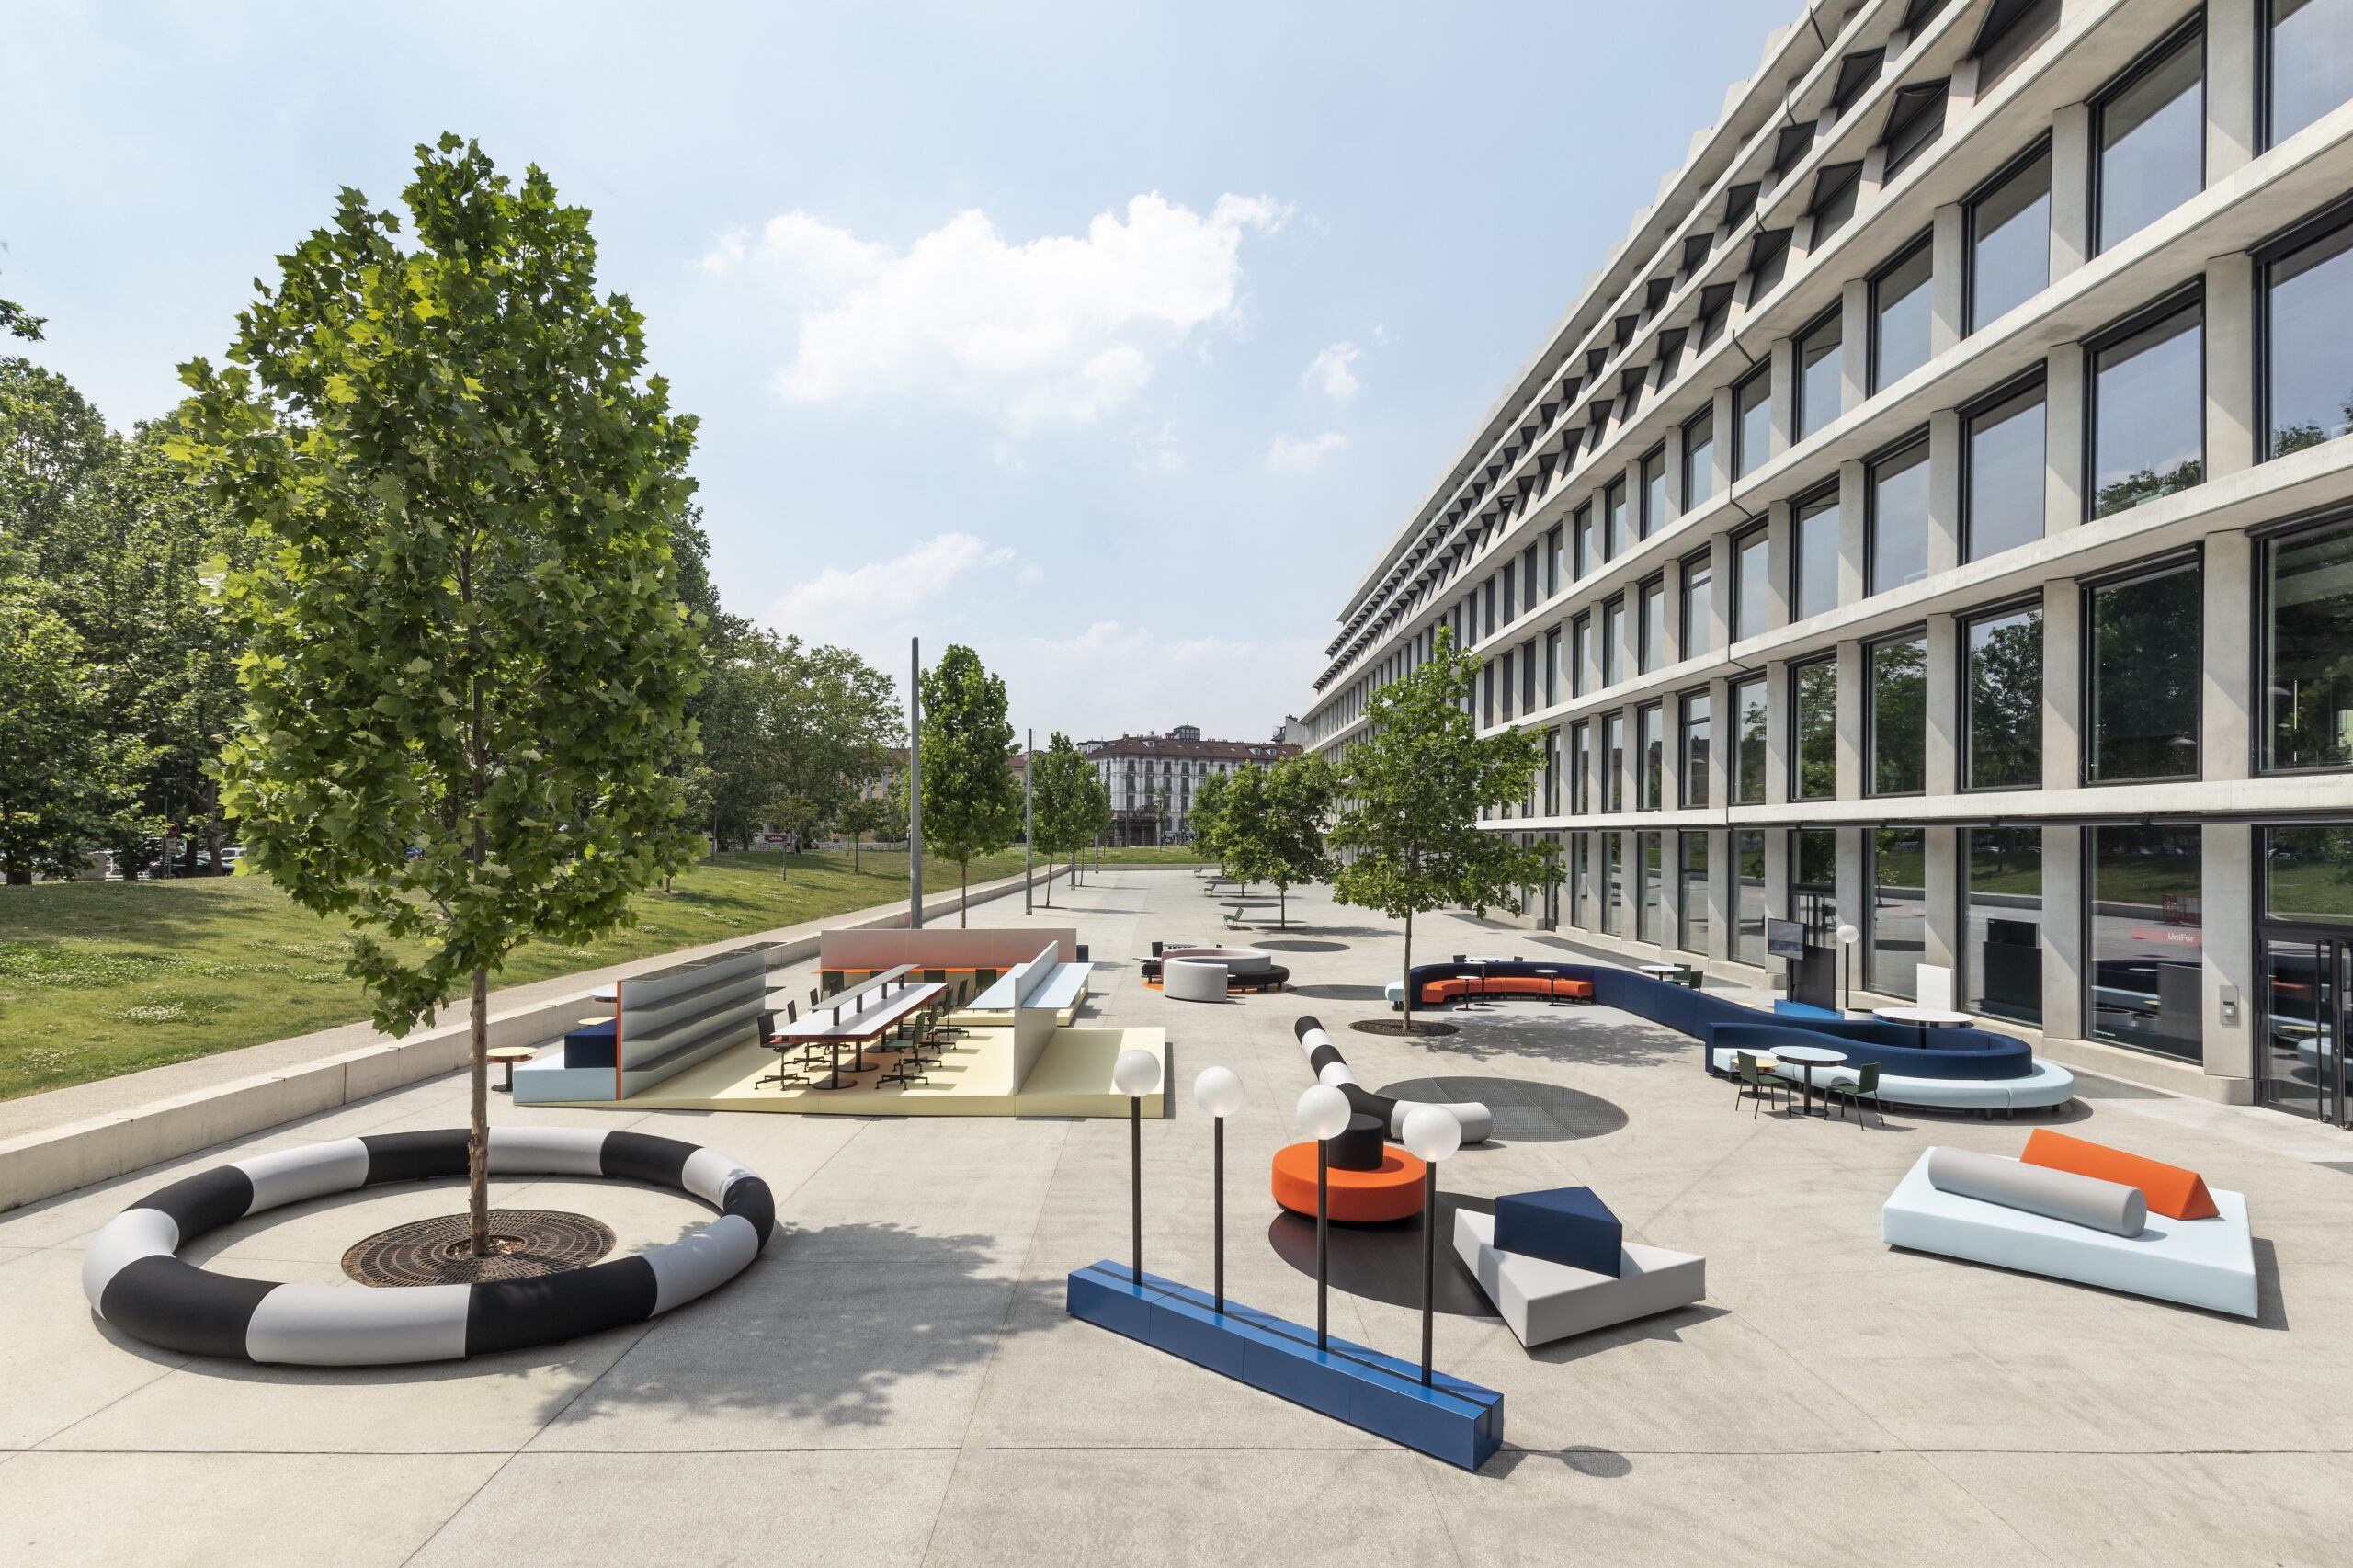 Image of a collection of furniture outdoor in a plaza in between a building and trees